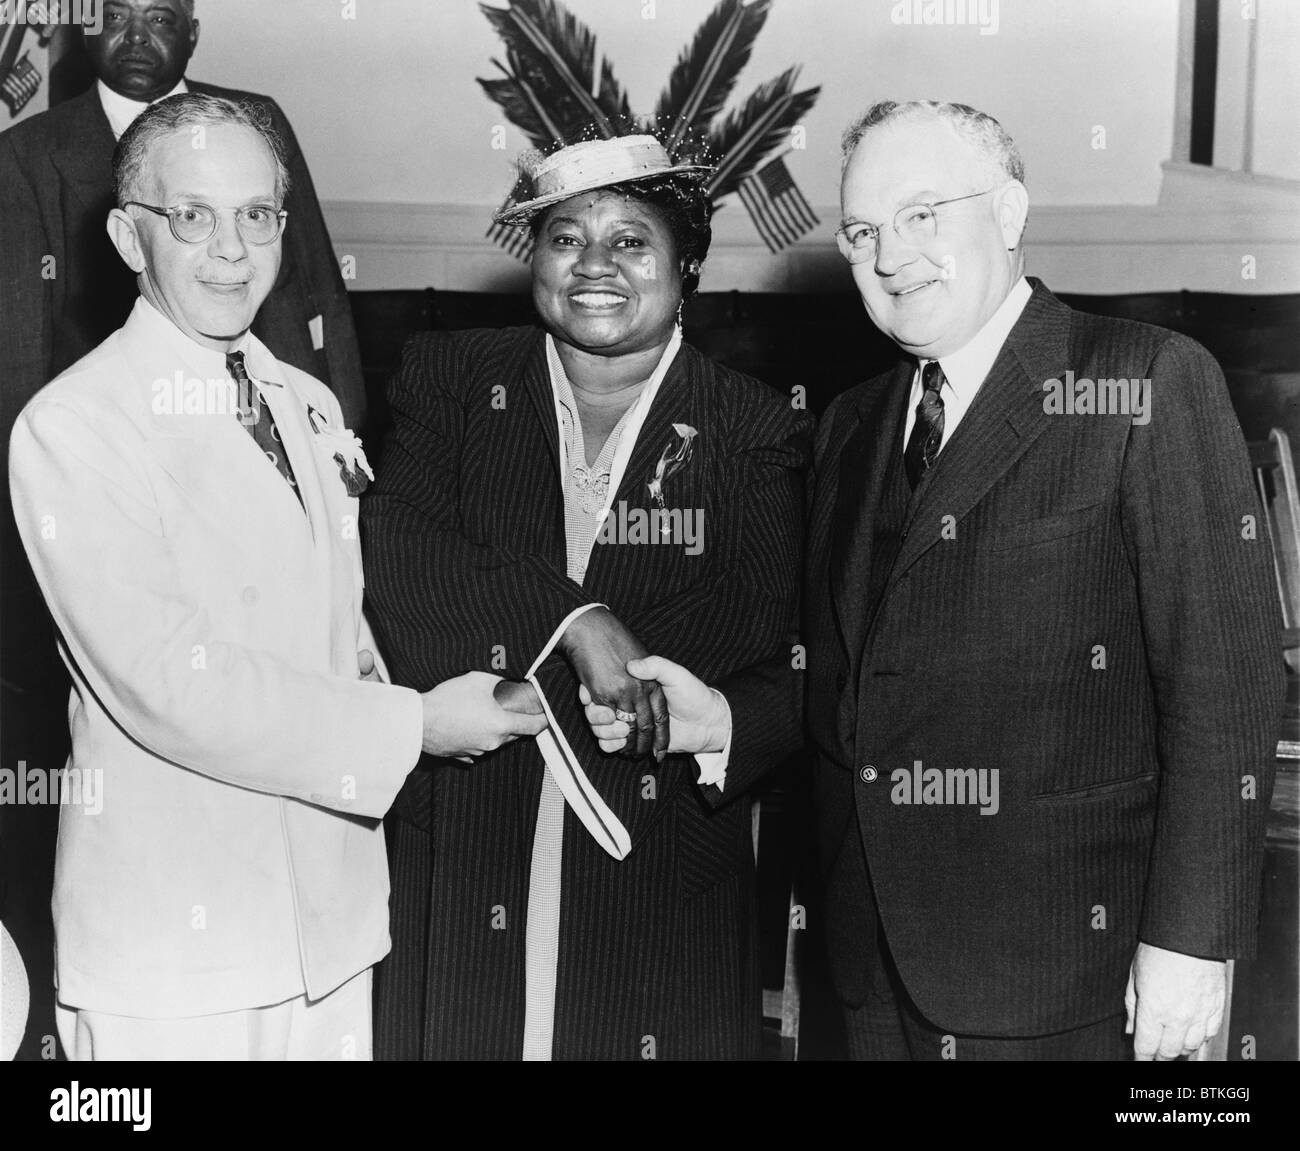 Hattie McDaniel (1895-1952), shaking hands with NAACP leaders, Walter F. White and Arthur Spingarn. McDaniel the first black performer to win an Academy Award in 1939. She had roles in over 60 films between 1932 and 1949. Ca. 1940. Stock Photo